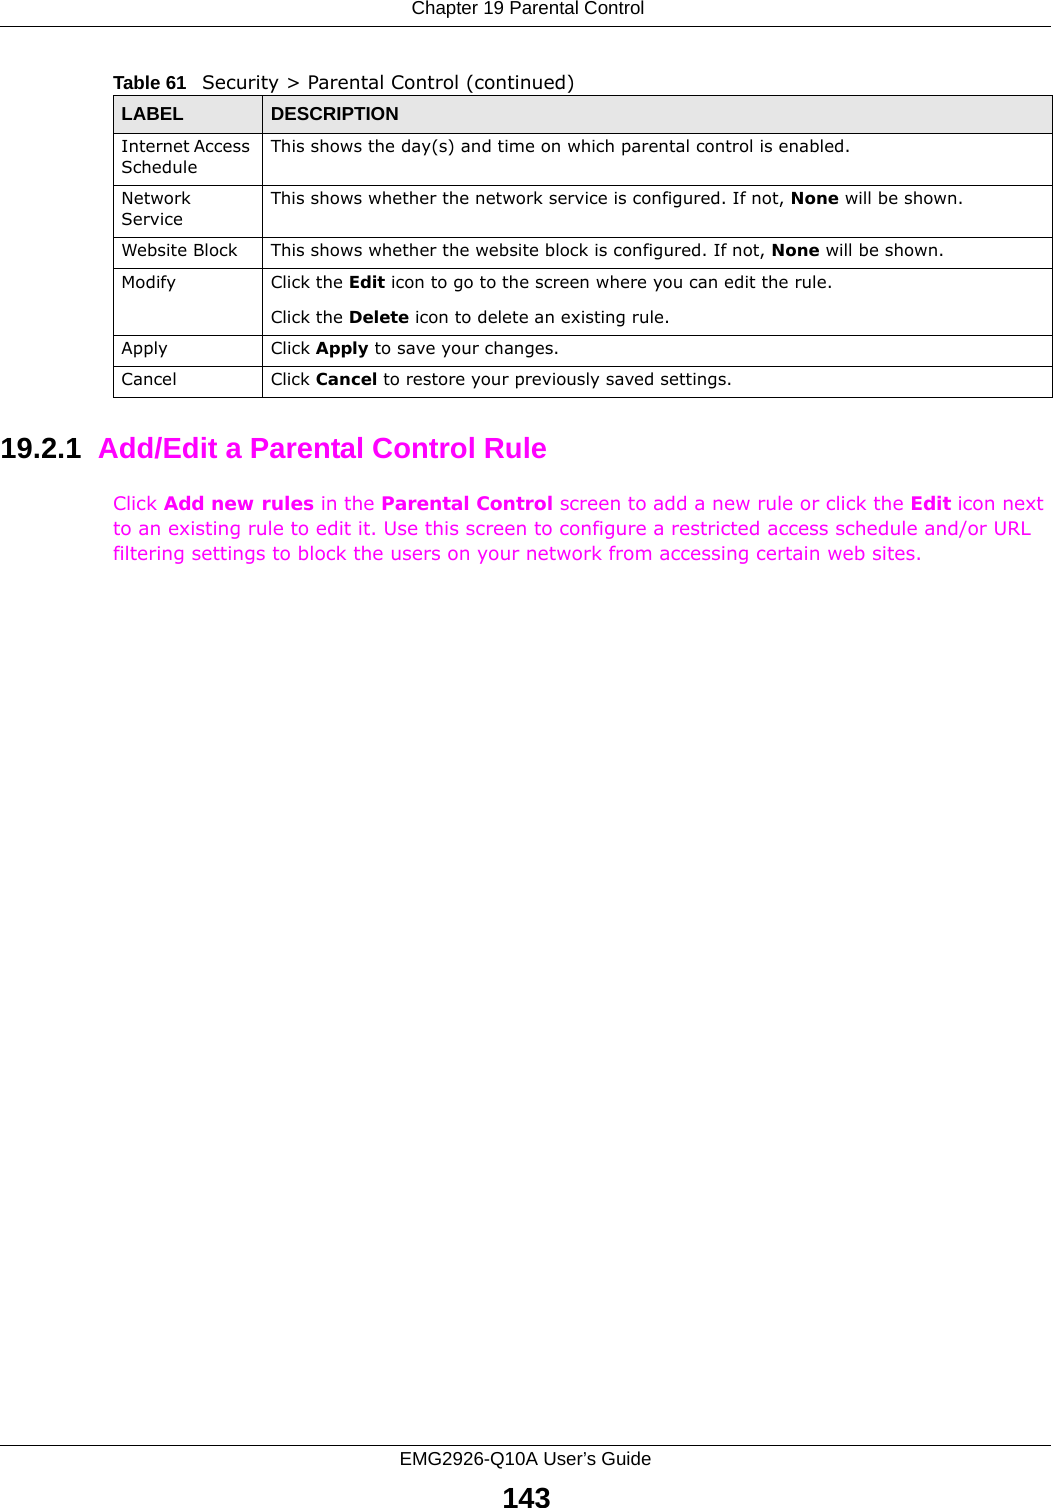  Chapter 19 Parental ControlEMG2926-Q10A User’s Guide14319.2.1  Add/Edit a Parental Control RuleClick Add new rules in the Parental Control screen to add a new rule or click the Edit icon next to an existing rule to edit it. Use this screen to configure a restricted access schedule and/or URL filtering settings to block the users on your network from accessing certain web sites.Internet Access ScheduleThis shows the day(s) and time on which parental control is enabled.Network ServiceThis shows whether the network service is configured. If not, None will be shown.Website Block This shows whether the website block is configured. If not, None will be shown.Modify Click the Edit icon to go to the screen where you can edit the rule.Click the Delete icon to delete an existing rule.Apply Click Apply to save your changes.Cancel Click Cancel to restore your previously saved settings.Table 61   Security &gt; Parental Control (continued)LABEL DESCRIPTION